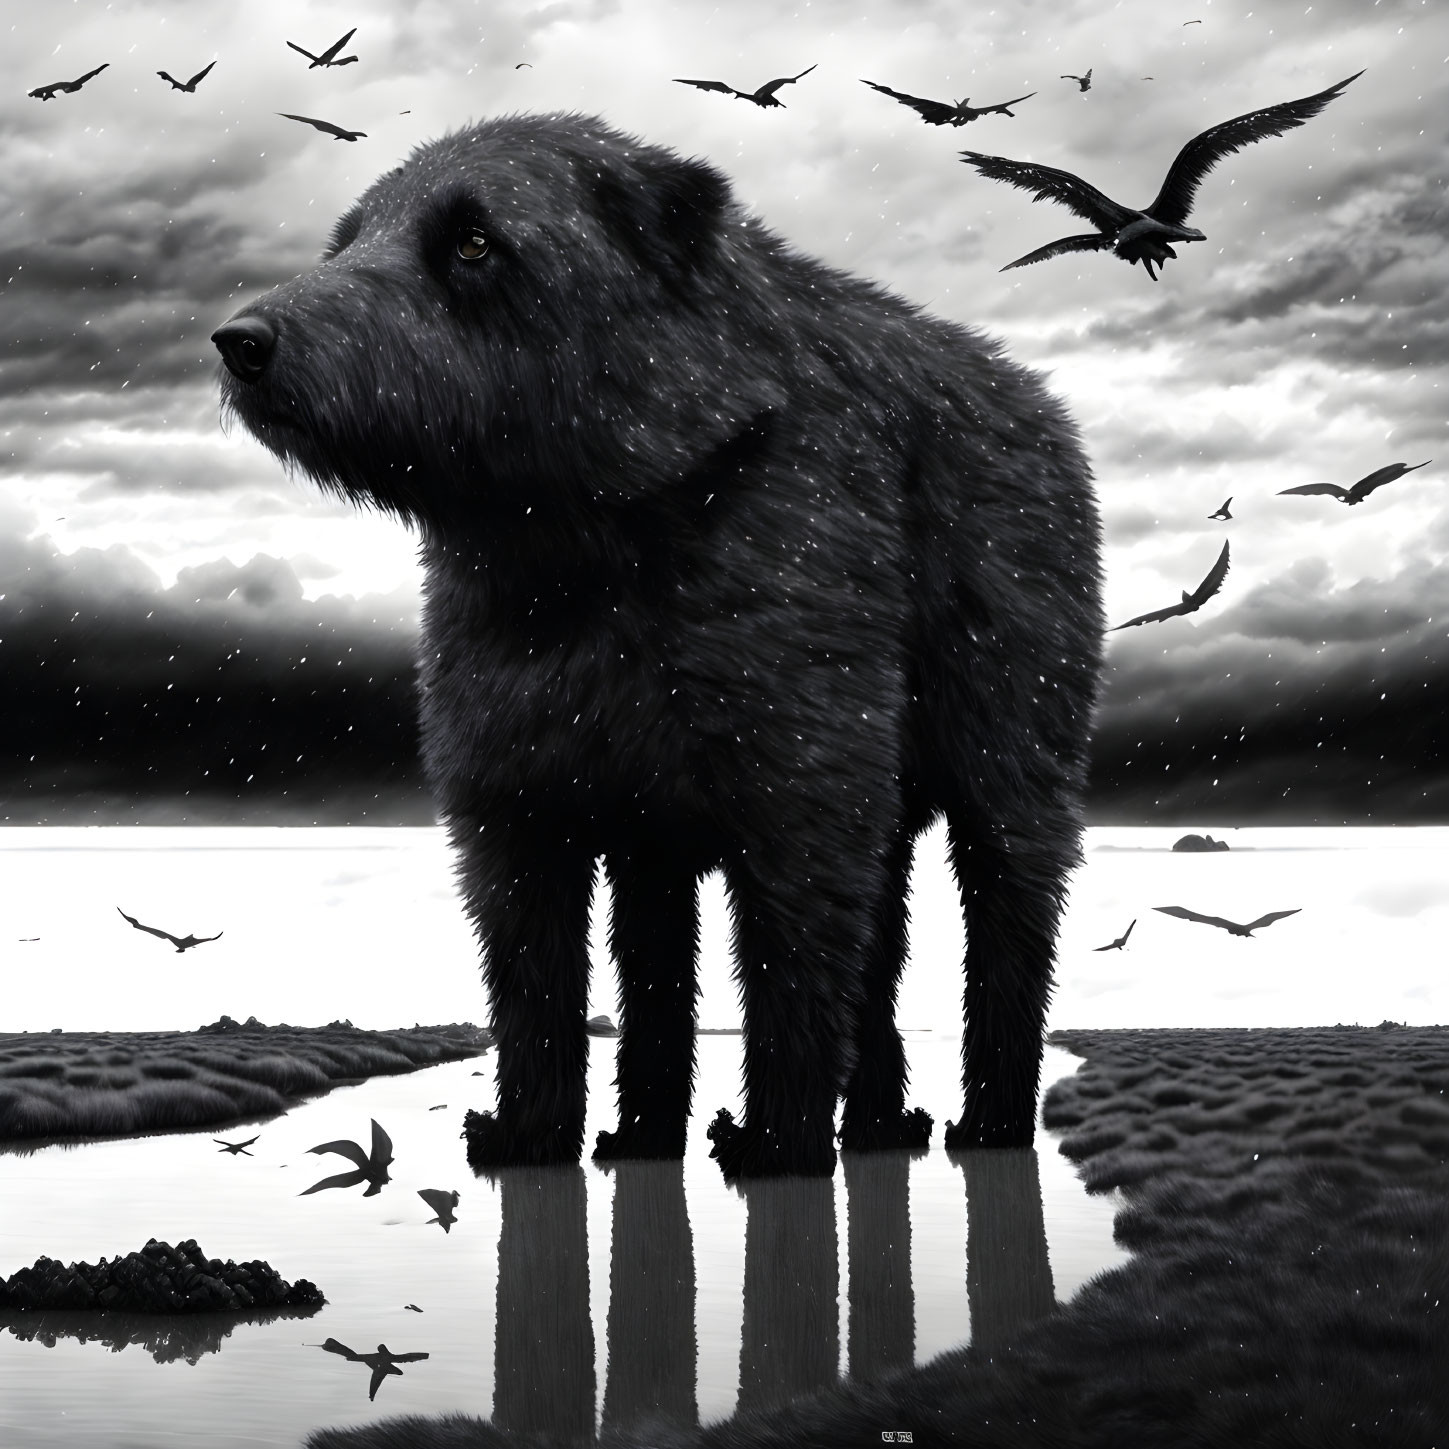 Monochrome image of large shaggy dog by reflective water with flying birds